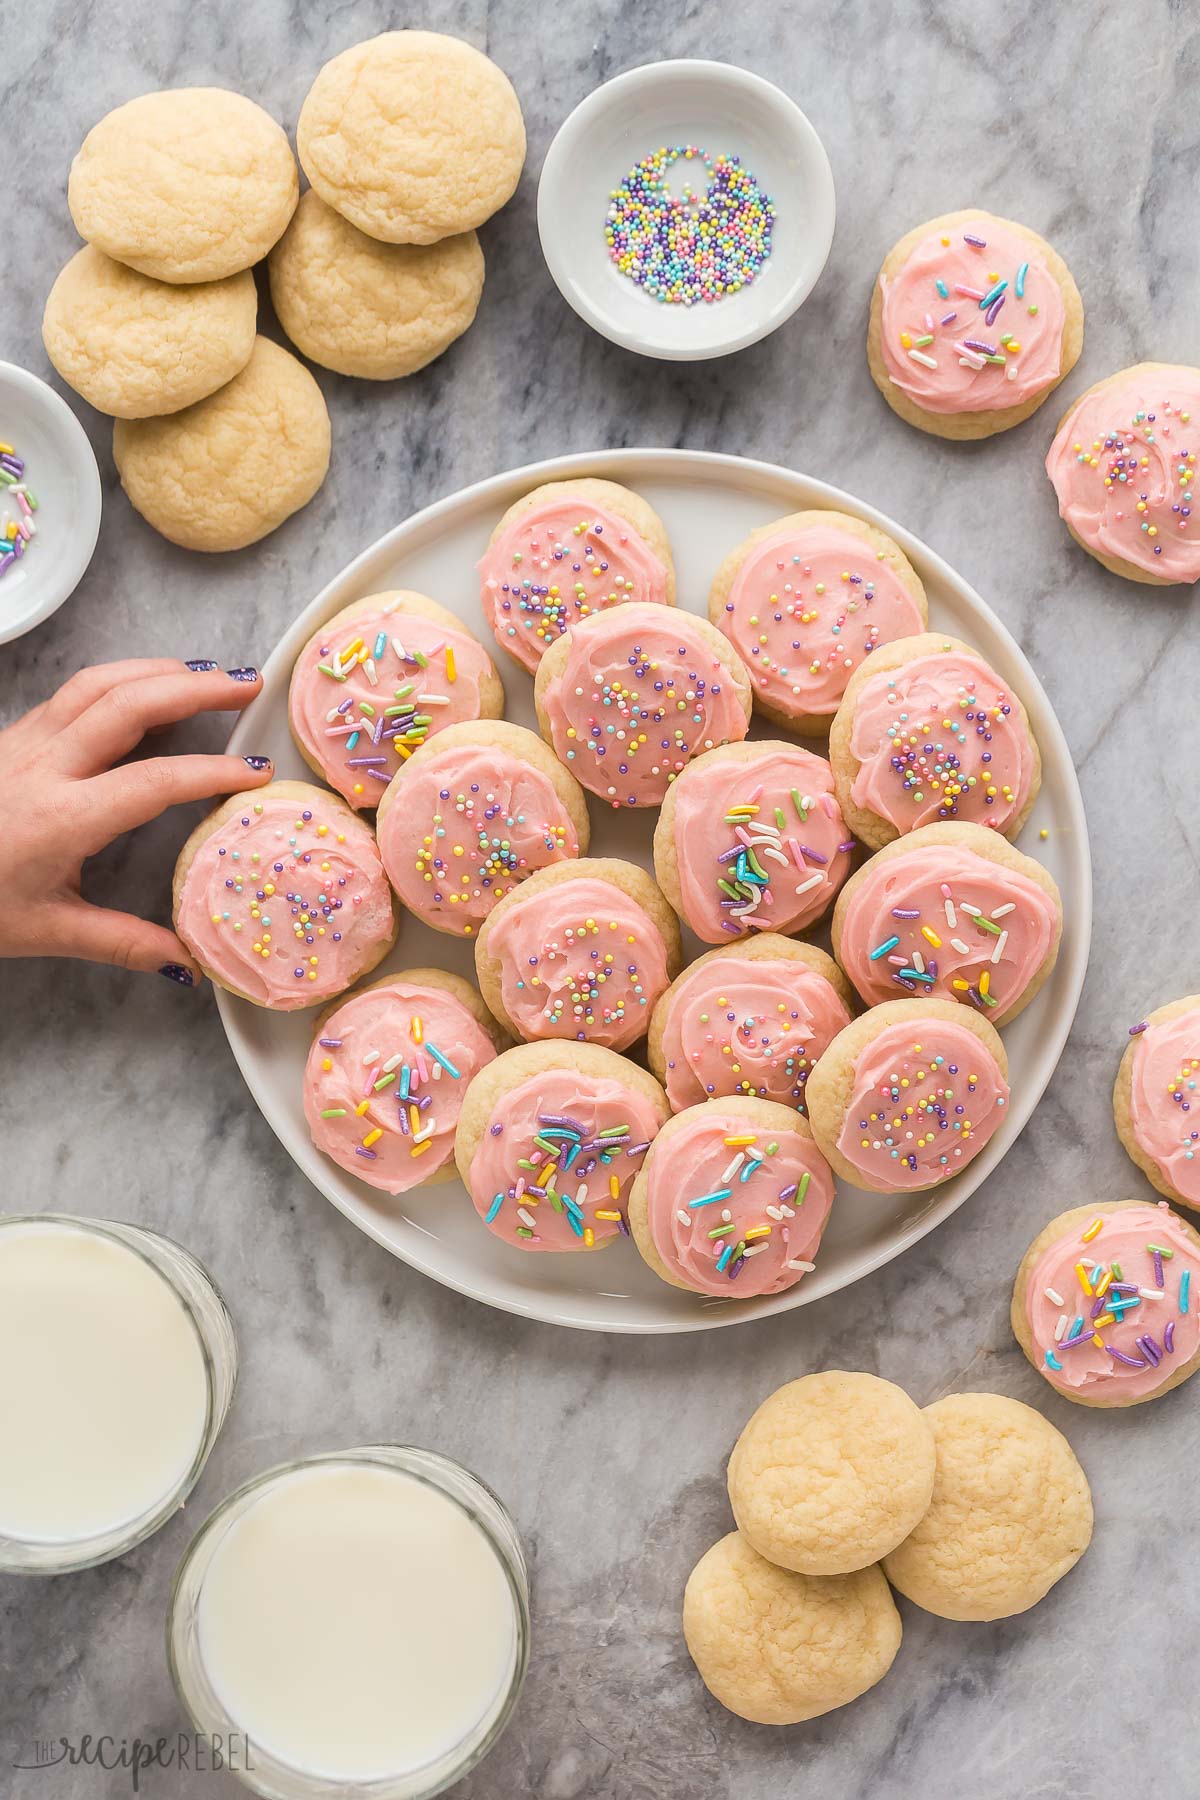 overhead image of frosted and unfrosted sugar cookies with hand reaching to take a cookie